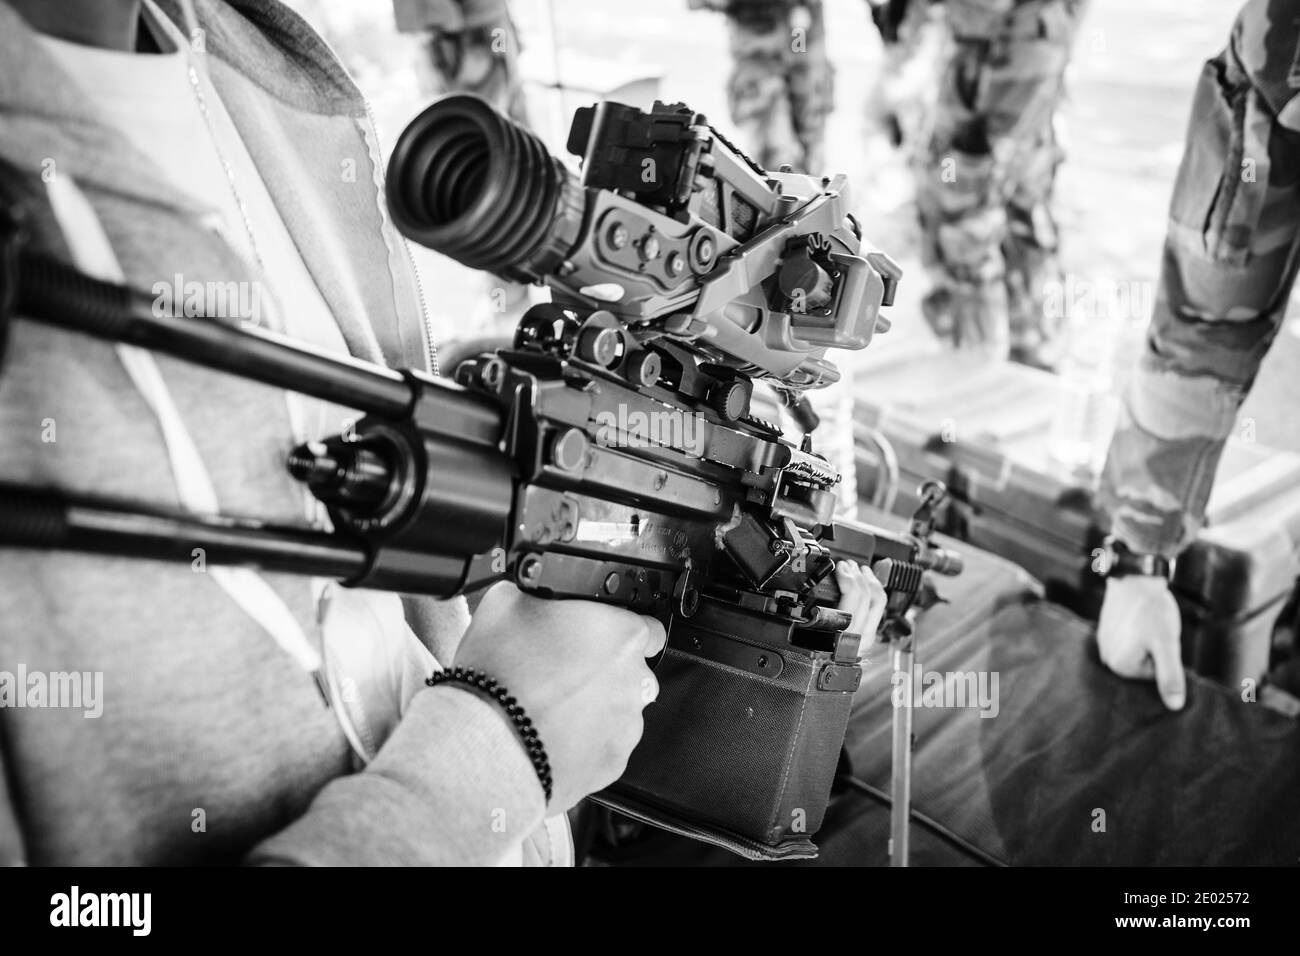 Strasbourg, France - Sep 21, 2019: Side view of male holding Heckler and Koch HK416 assault rifle designed and manufactured by the German company with Stock Photo